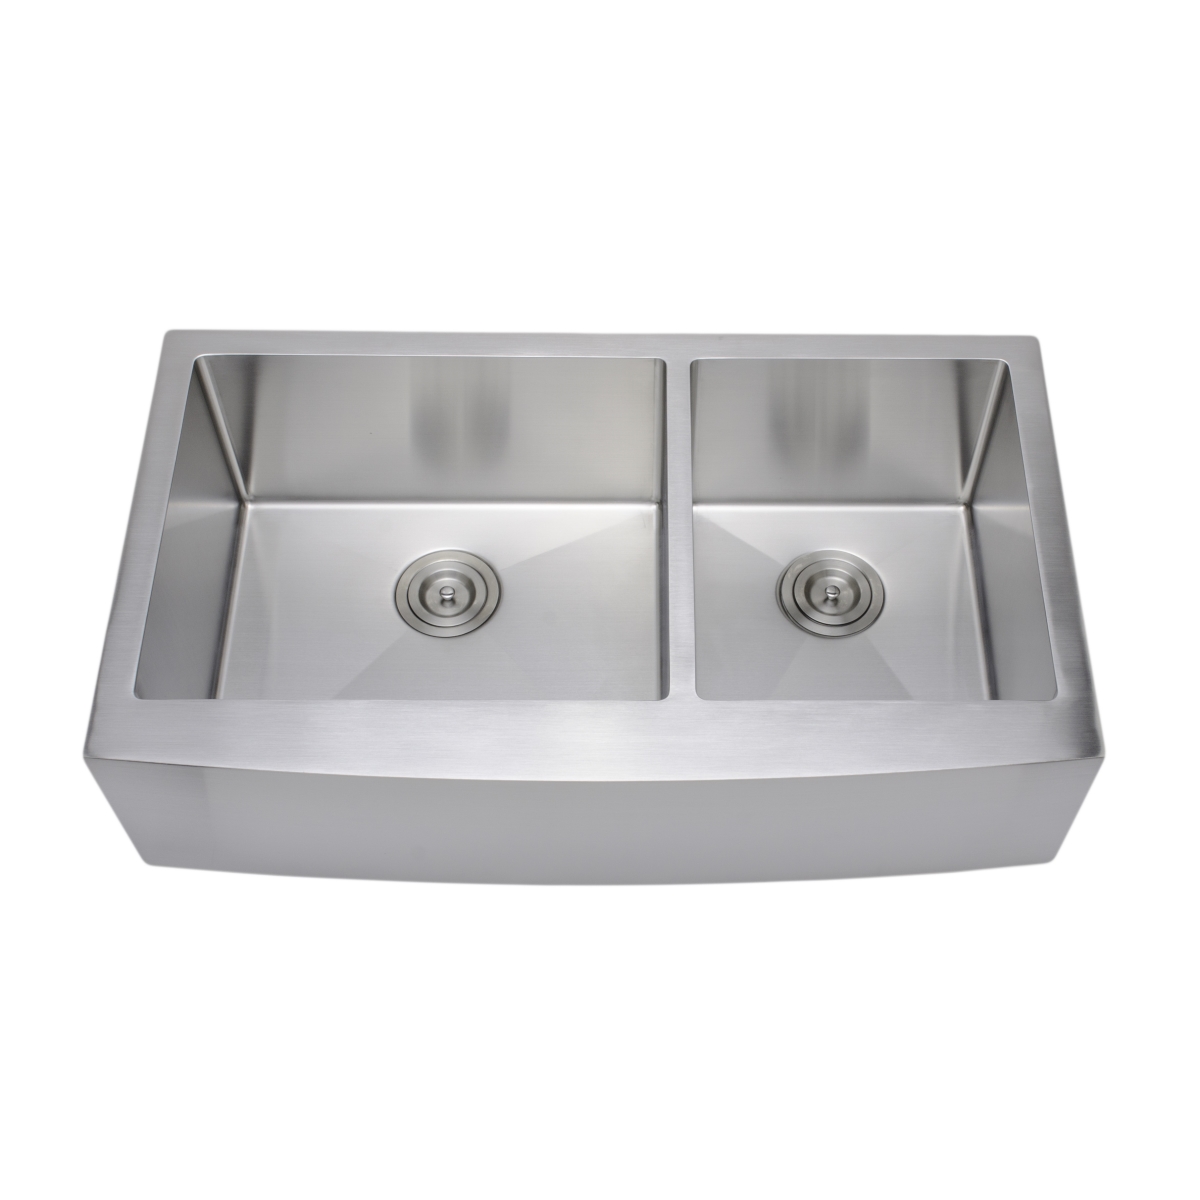 36 in. Handcrafted 16 Gauge Arched Apron Front Farmhouse 60-40 Double Bowl Stainless Steel Kitchen Sink -  Desorden, DE3268787